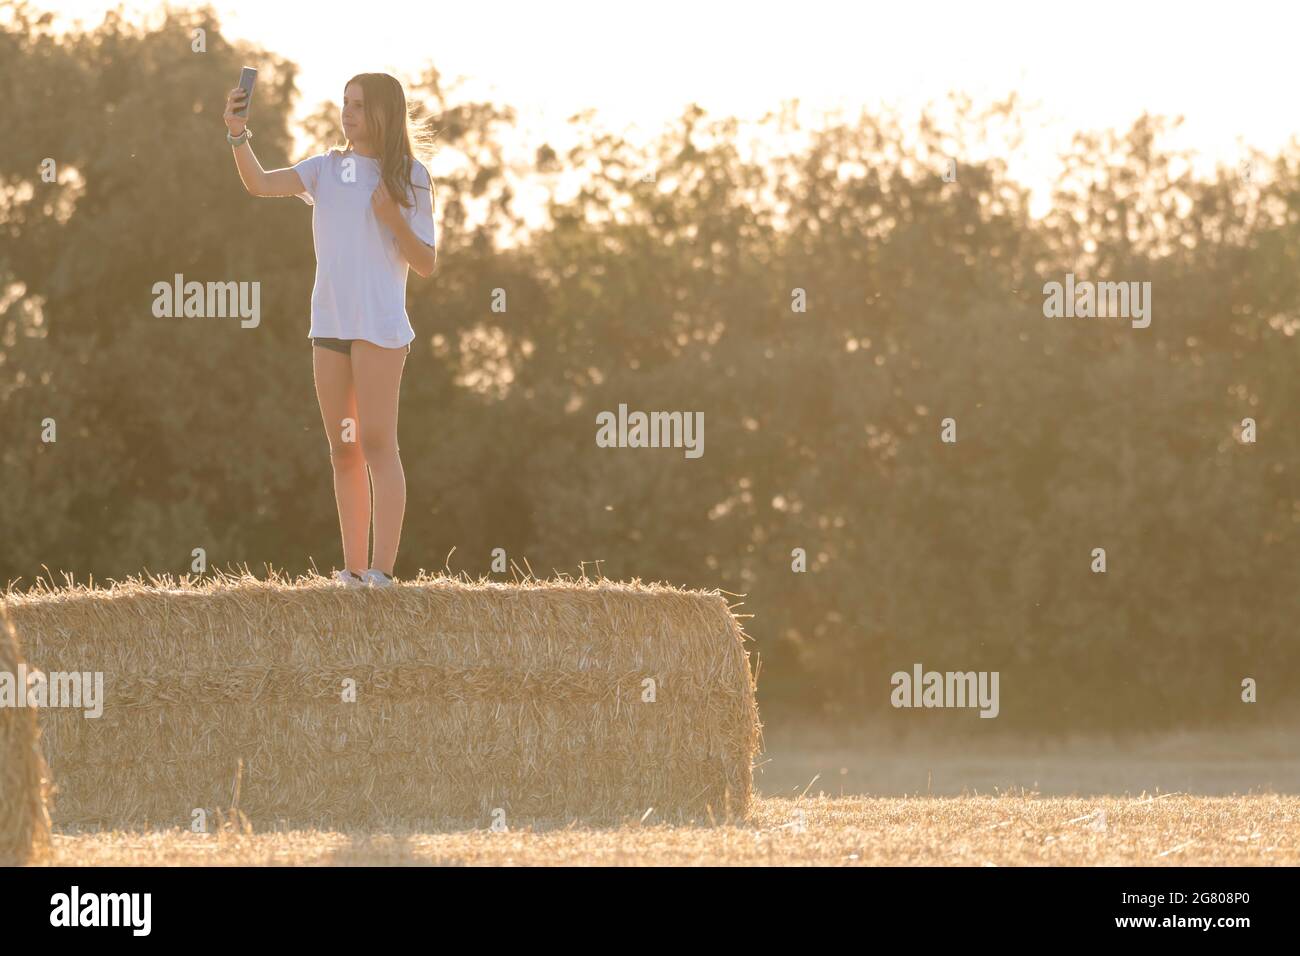 teenage latina girl with black hair and white t-shirt and shorts taking a selfie on top of a bale of straw in a harvested field at dusk. Stock Photo